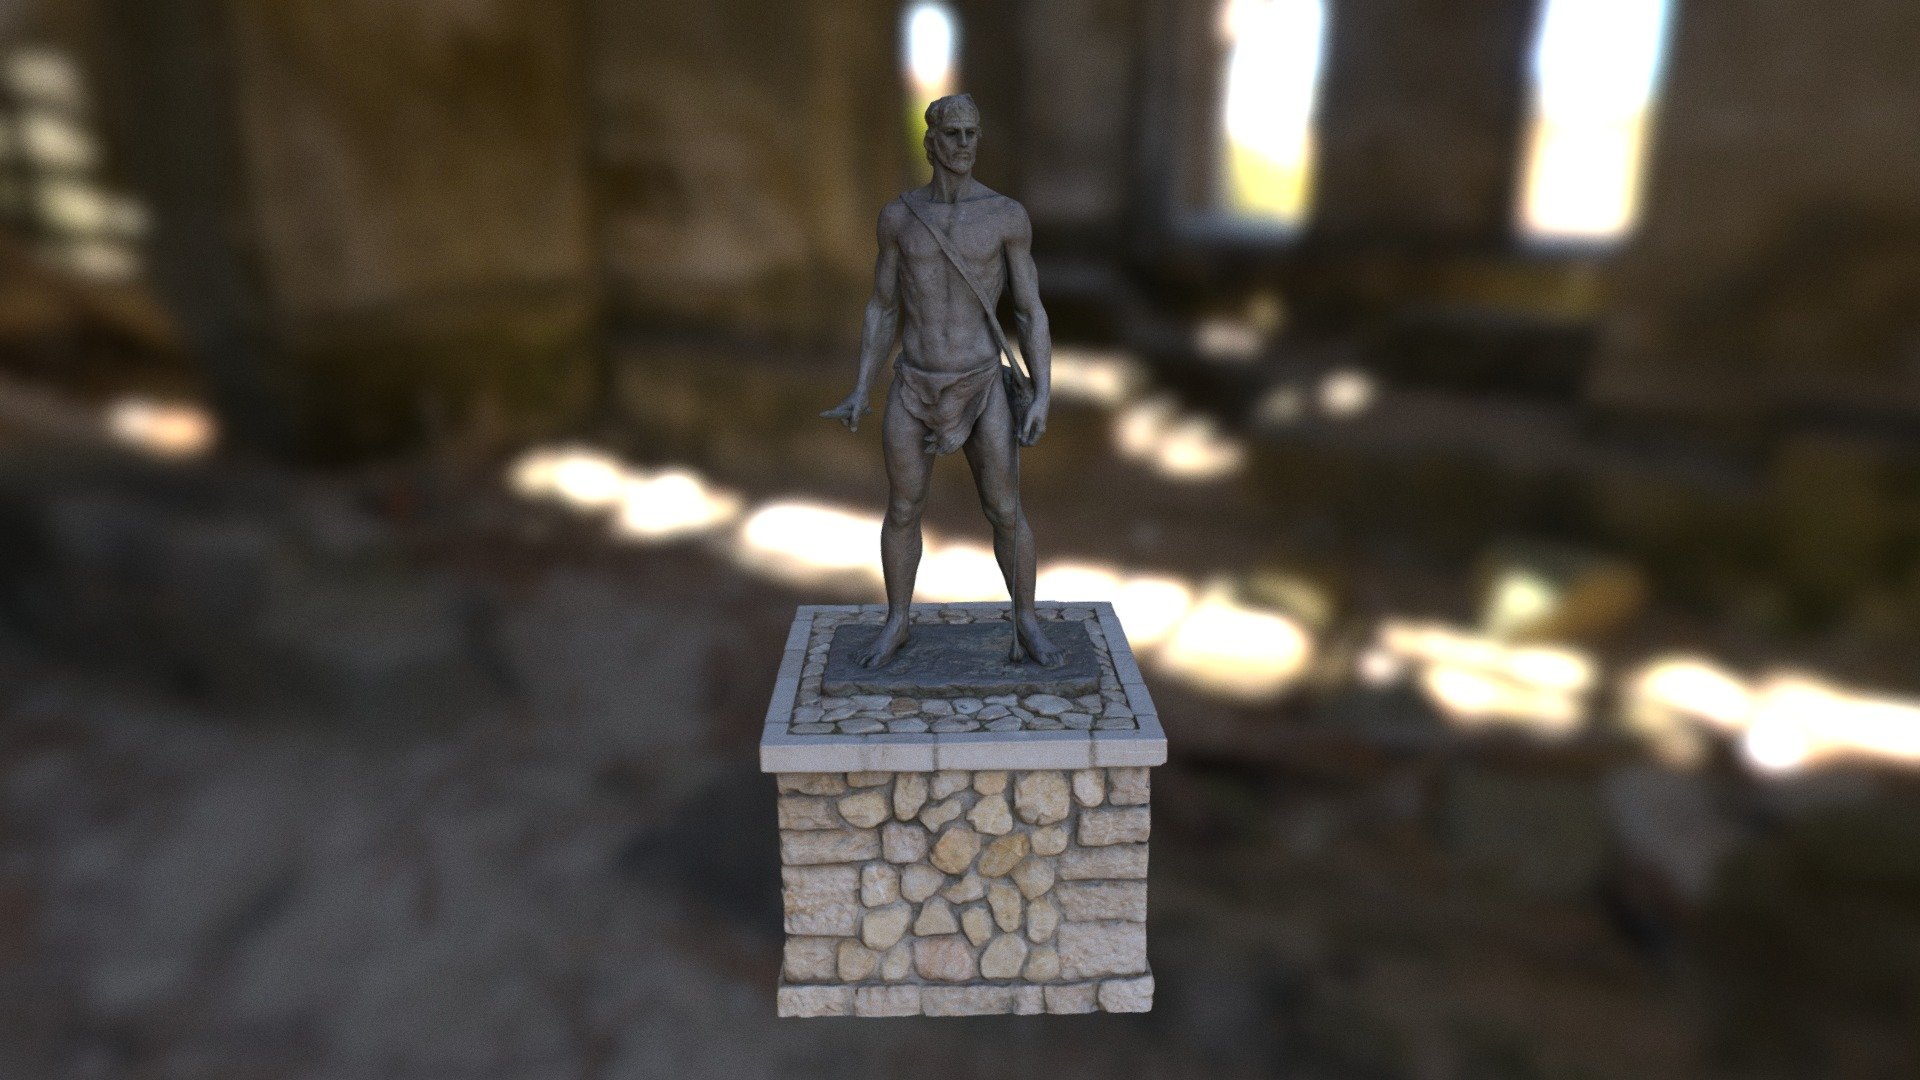 David is a Statue of a Balearic Slinger, or slingshot warrior located in Felanitx, Mallorca Spain. Stone slinging (or sling shooting) existed in the Mediterranean since about 6oo B. C.. Originally this technique was used for hunting, and later on as a defense against attacking intruders 3d model